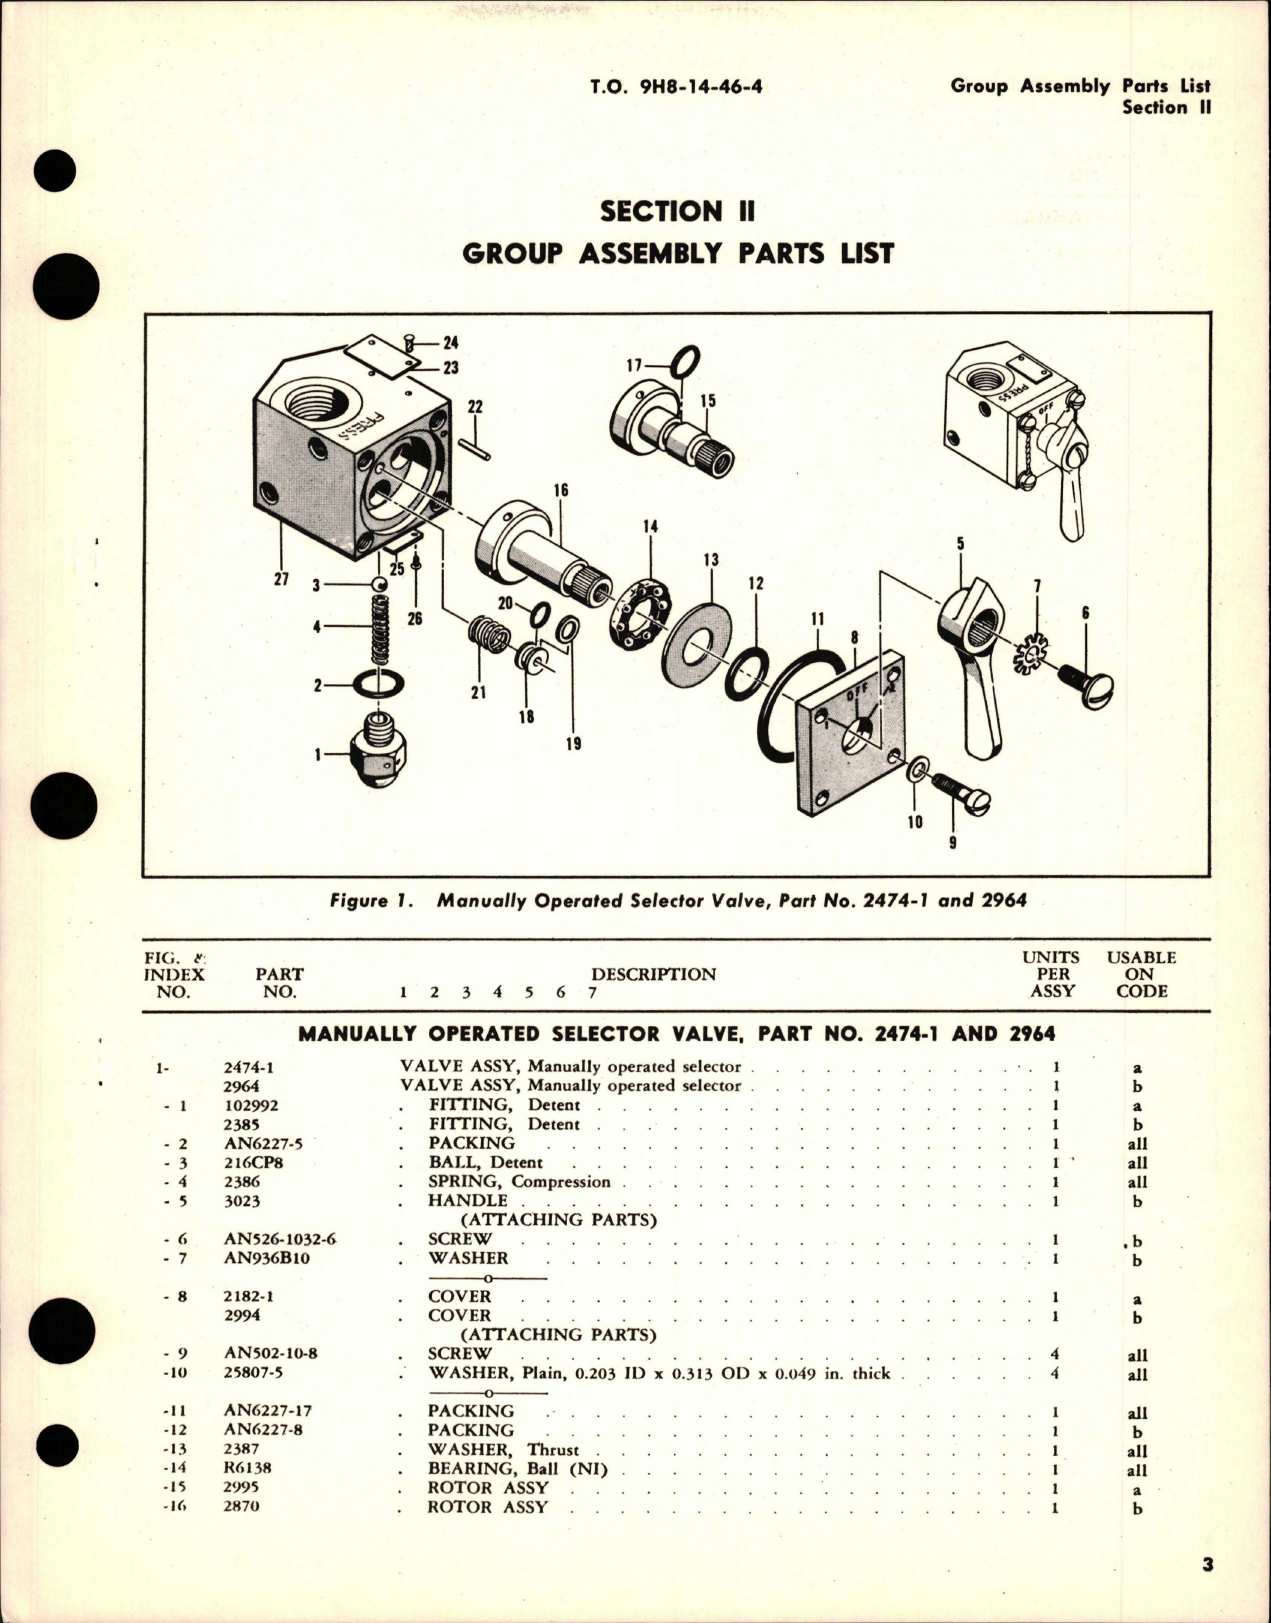 Sample page 5 from AirCorps Library document: Illustrated Parts Breakdown for Manually Operated Shutoff and Selector Valve Assemblies